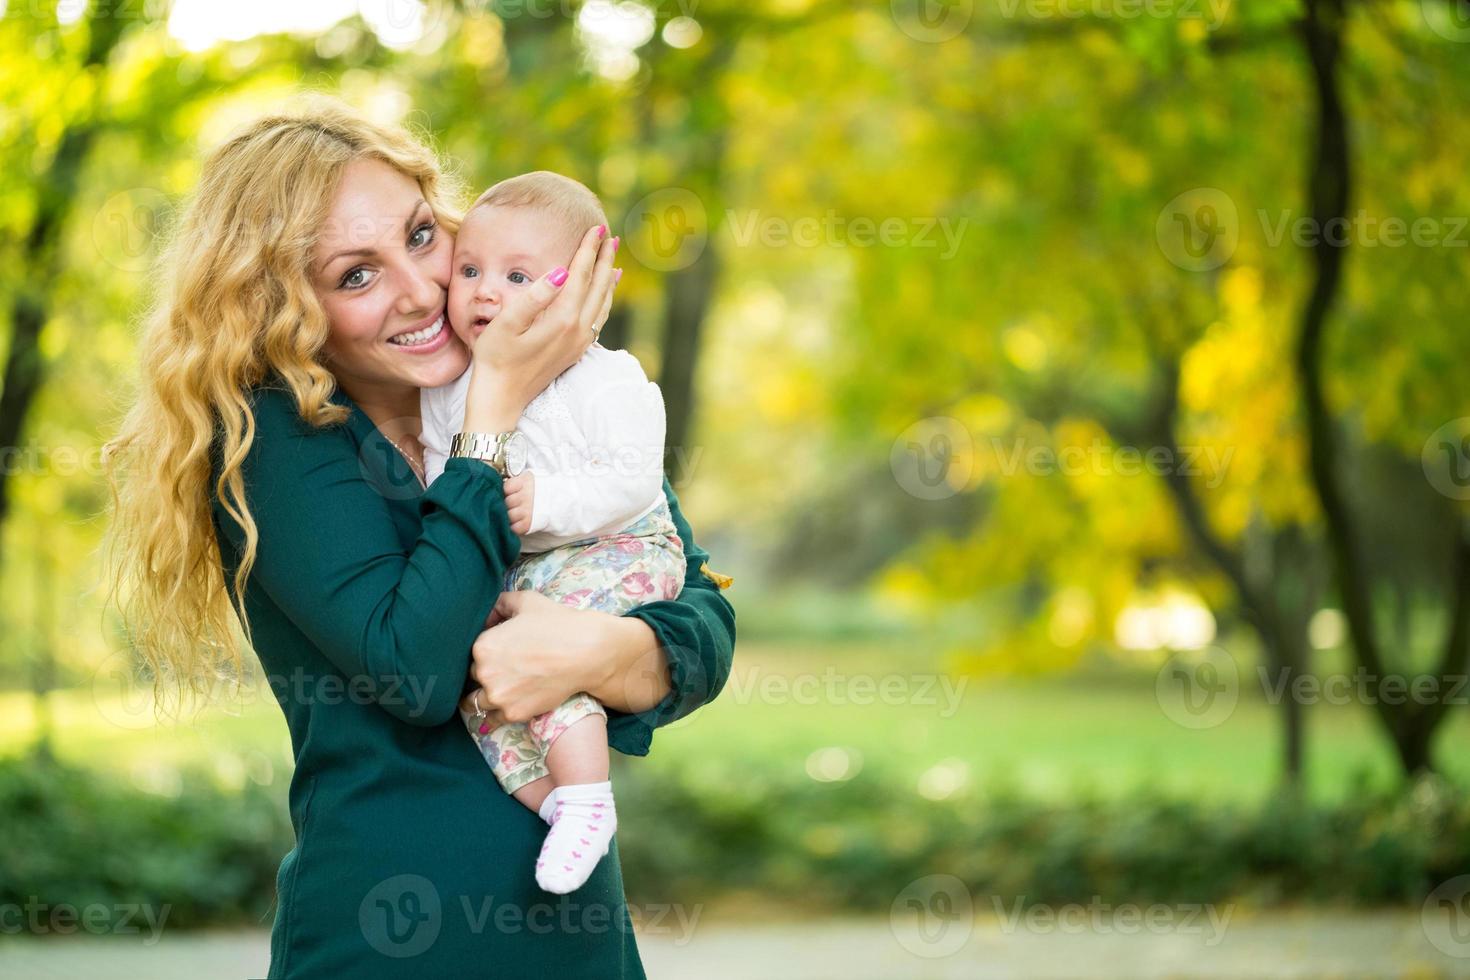 Portrait of young mother with baby photo